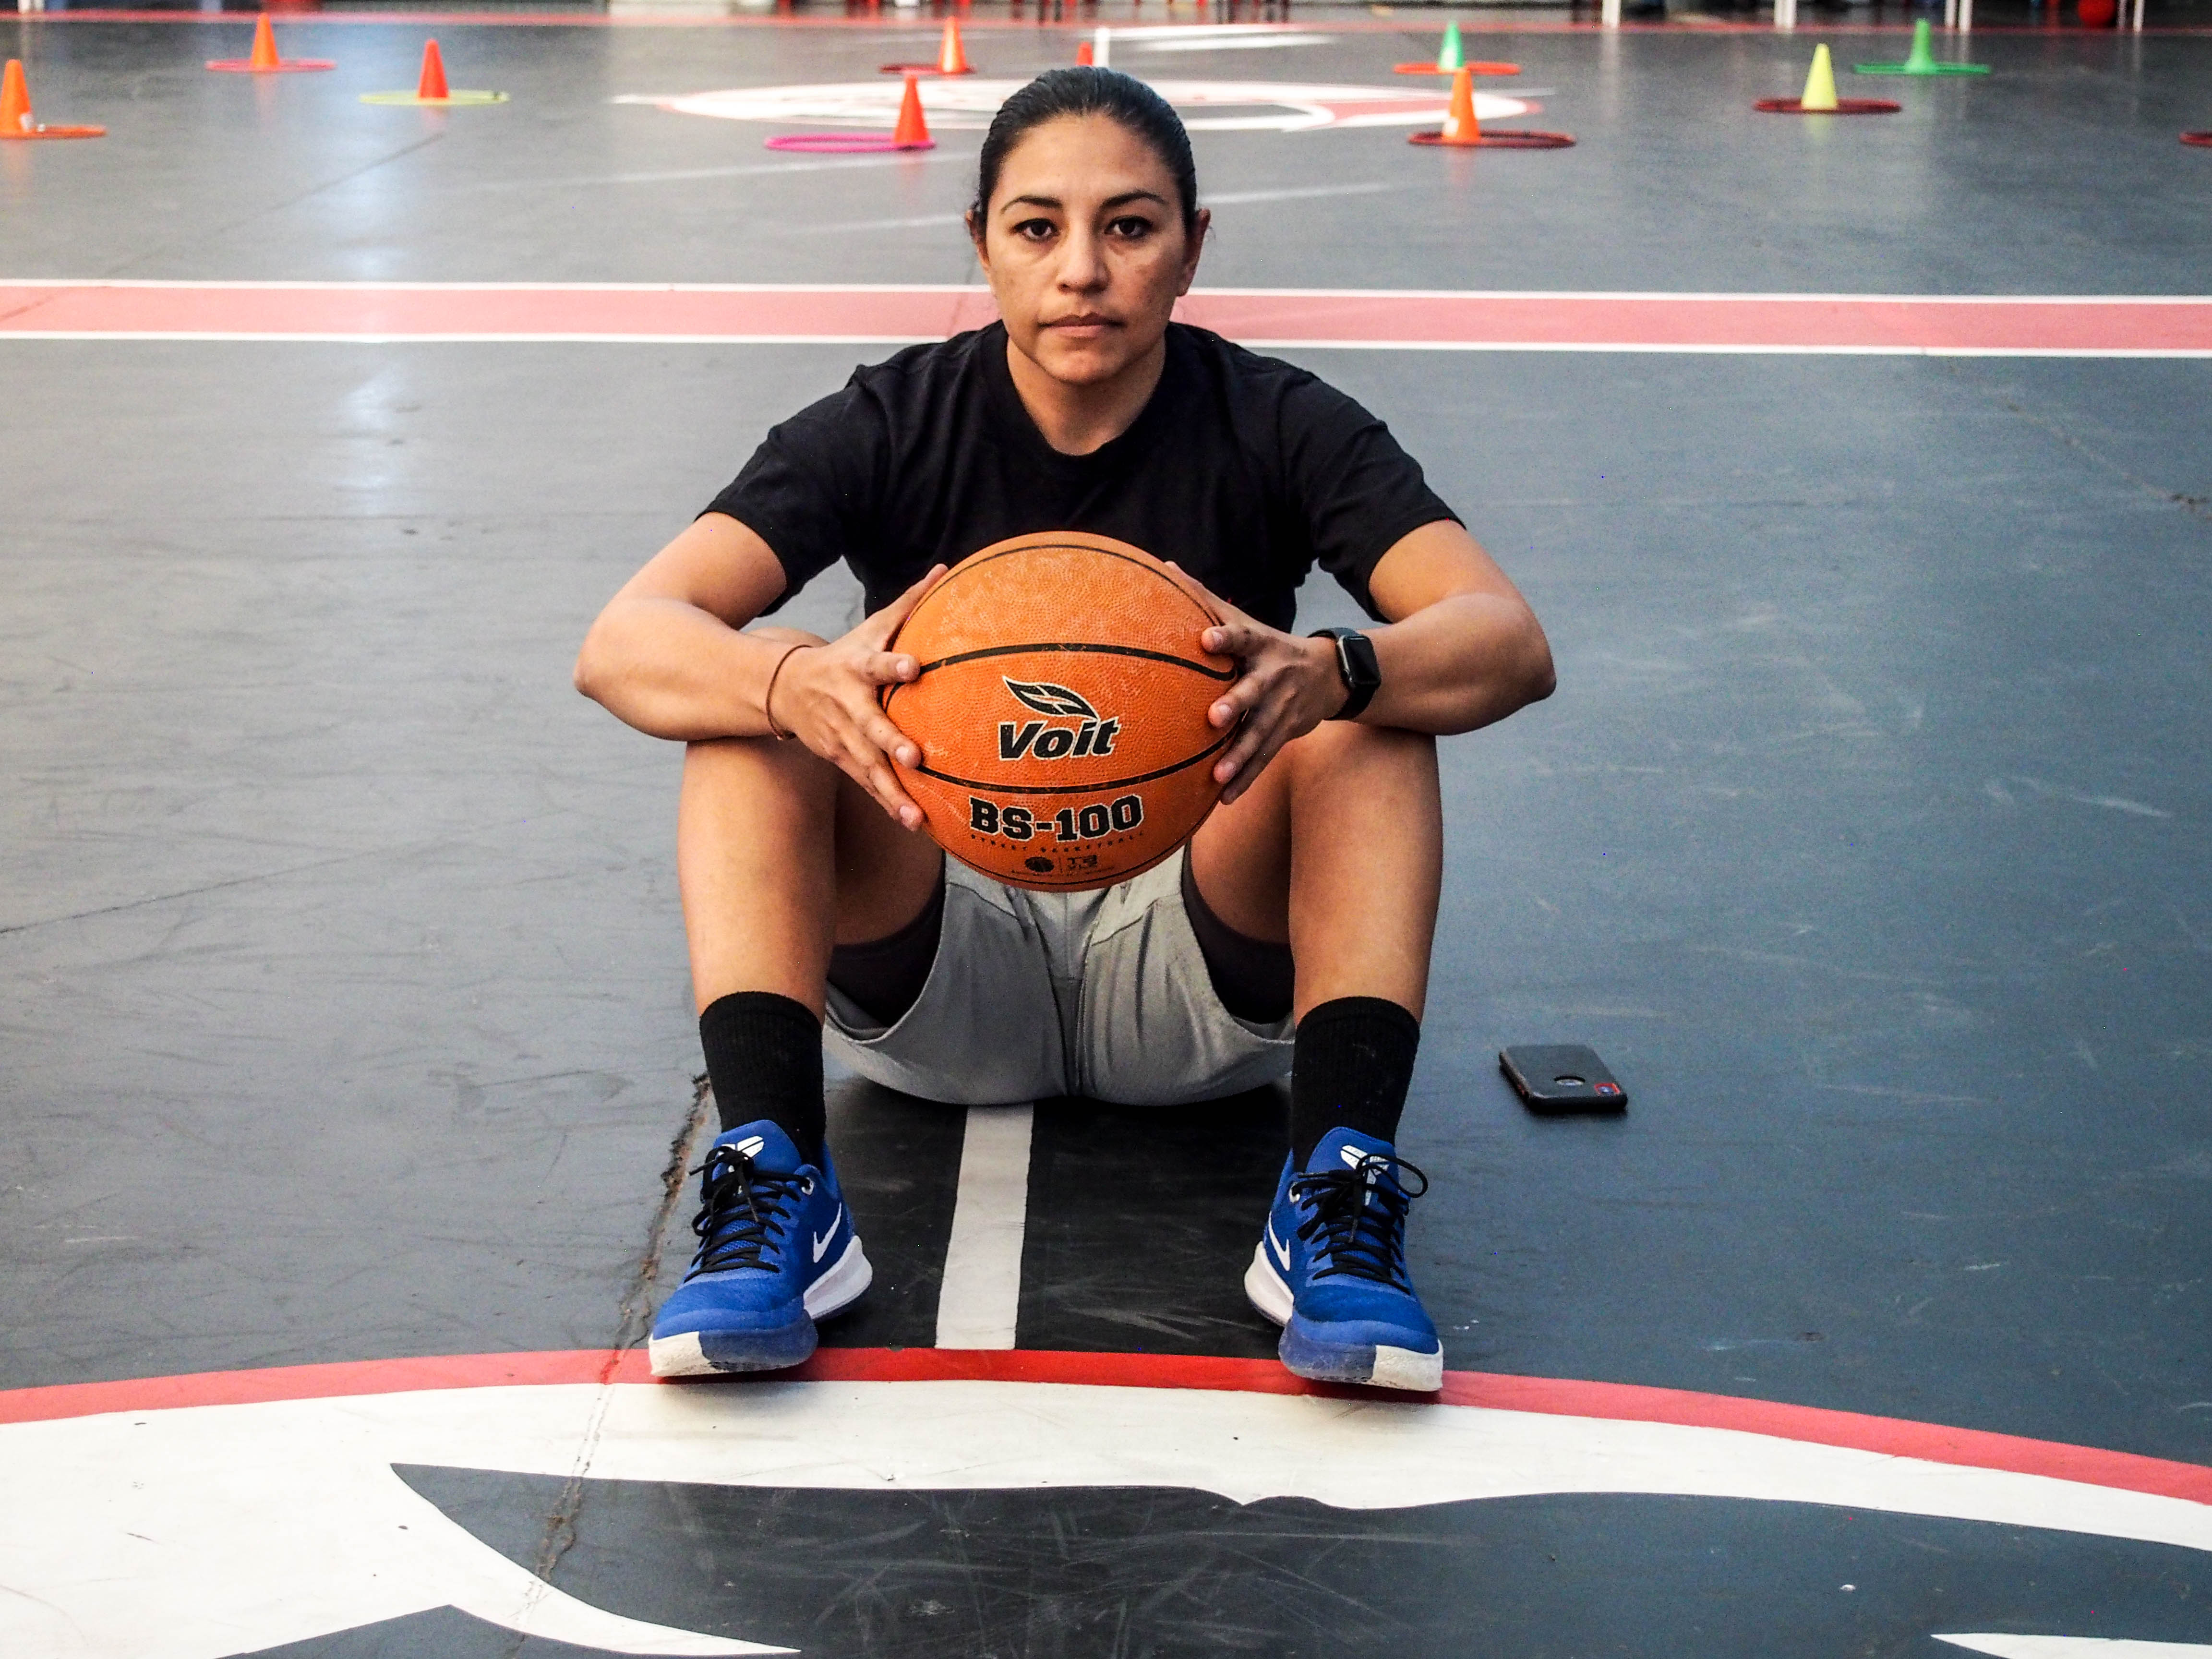 Meet the Woman Breaking Basketball's Glass Ceiling in Mexico